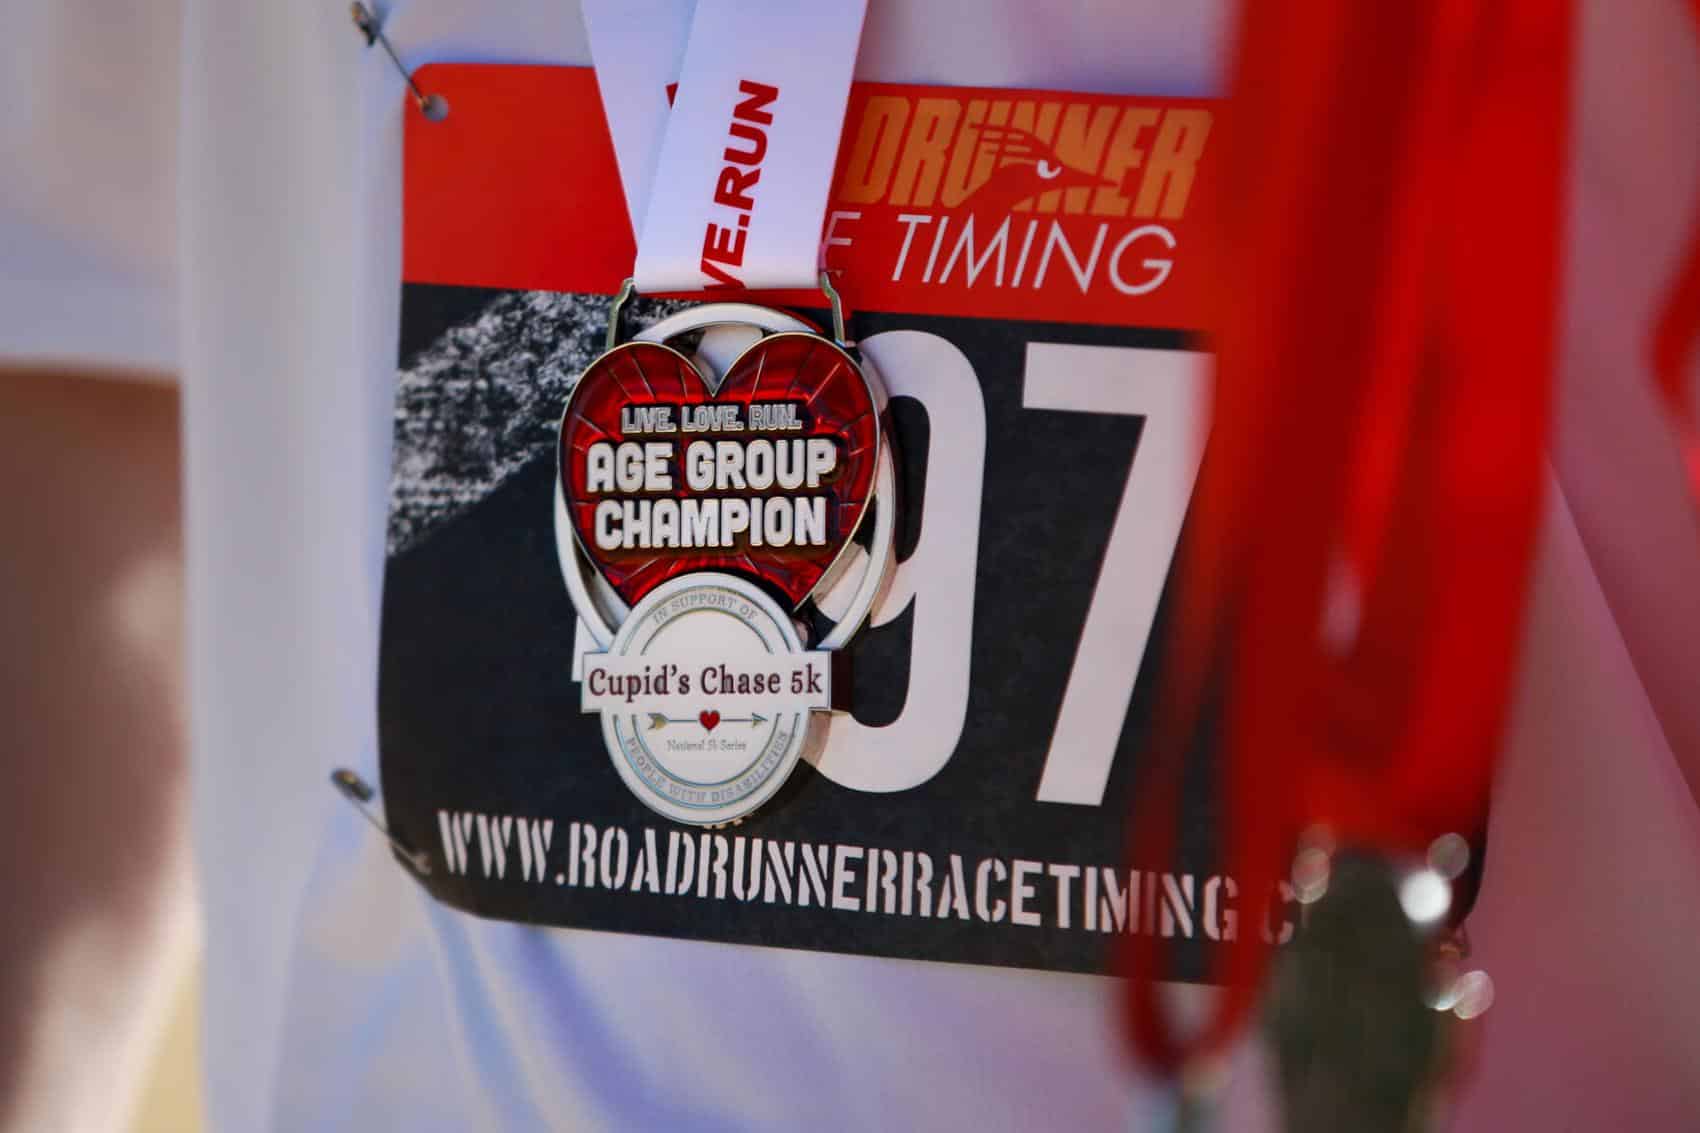 The Cupid's Chase 5K Run features two medals, one for participation and another for the winner of the age group. This year the run took place on February 12, 2022 at Reid Park. Ana Beltran, Arizona Daily Star